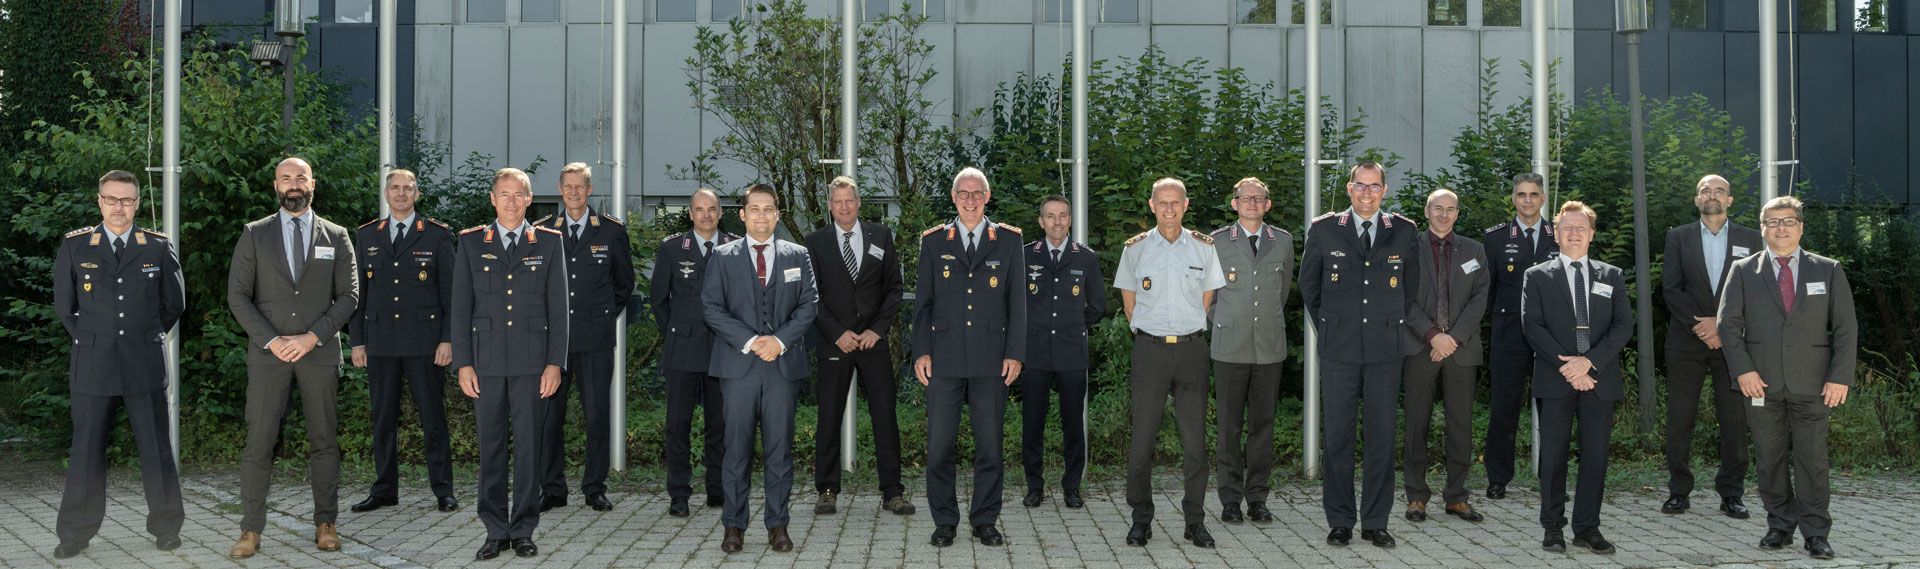 Group picture of all participants of the DLR compact course on space flight for the German Air Force